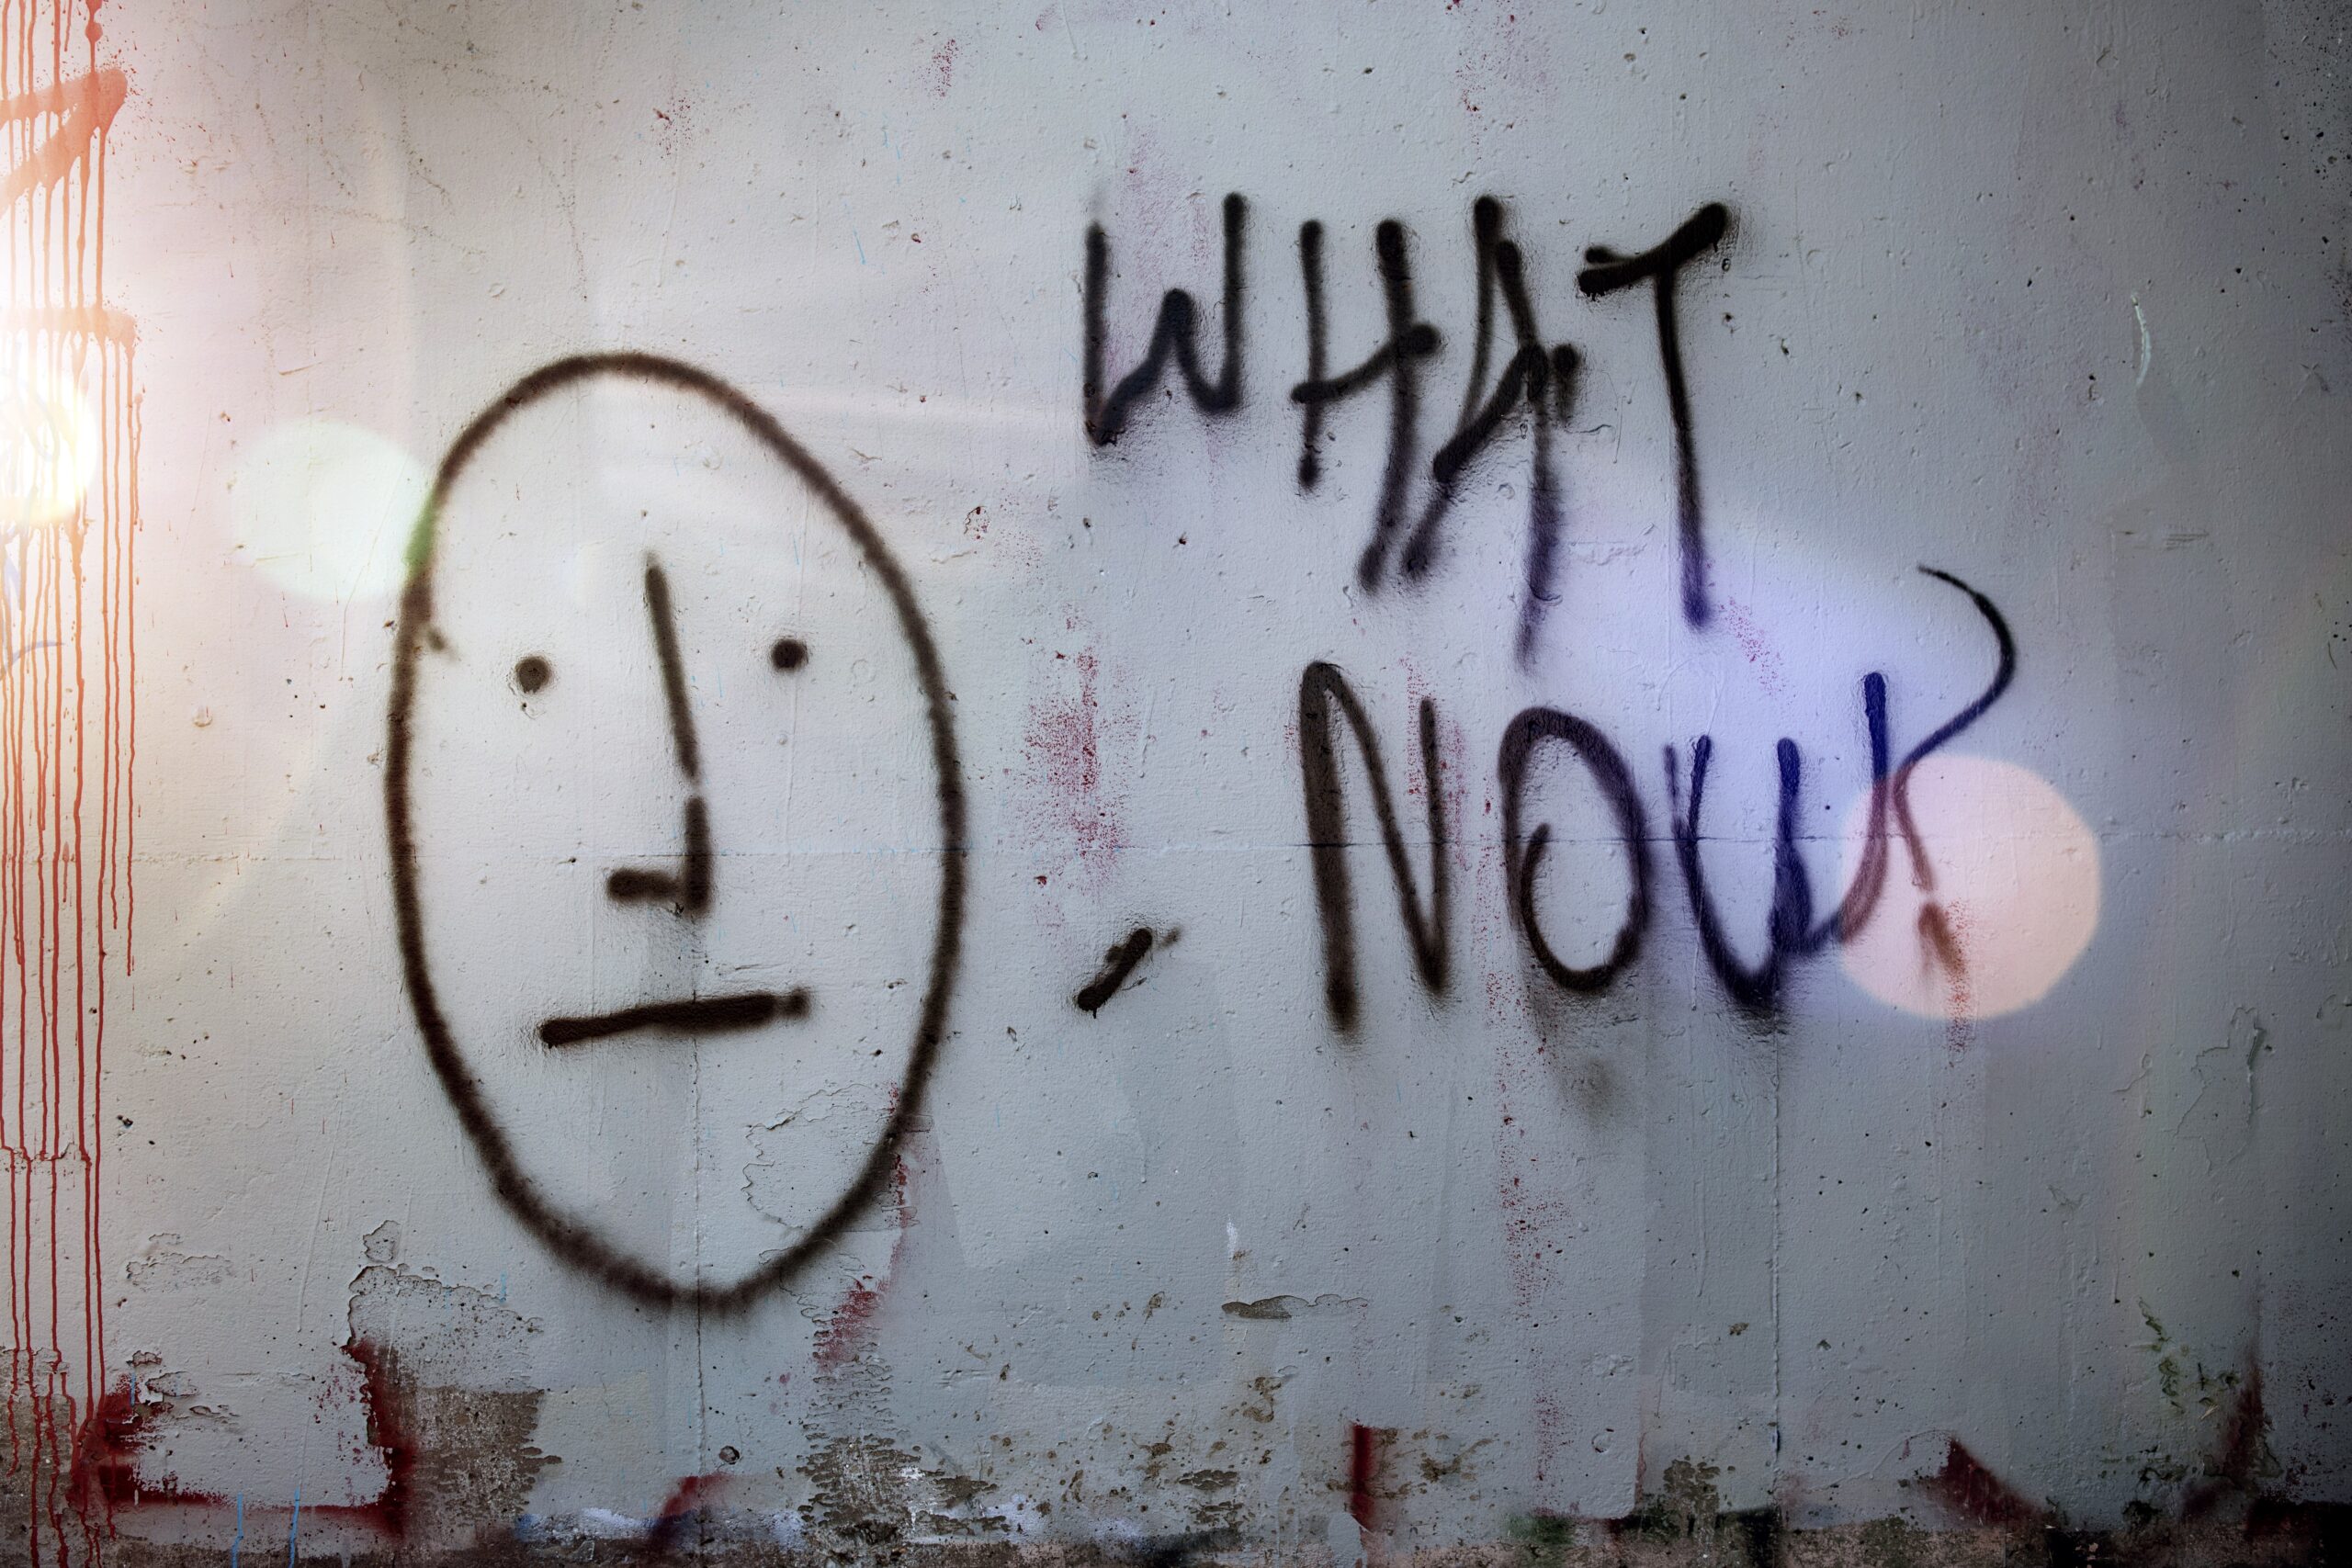 Graffiti on wall that reads, "What now?"